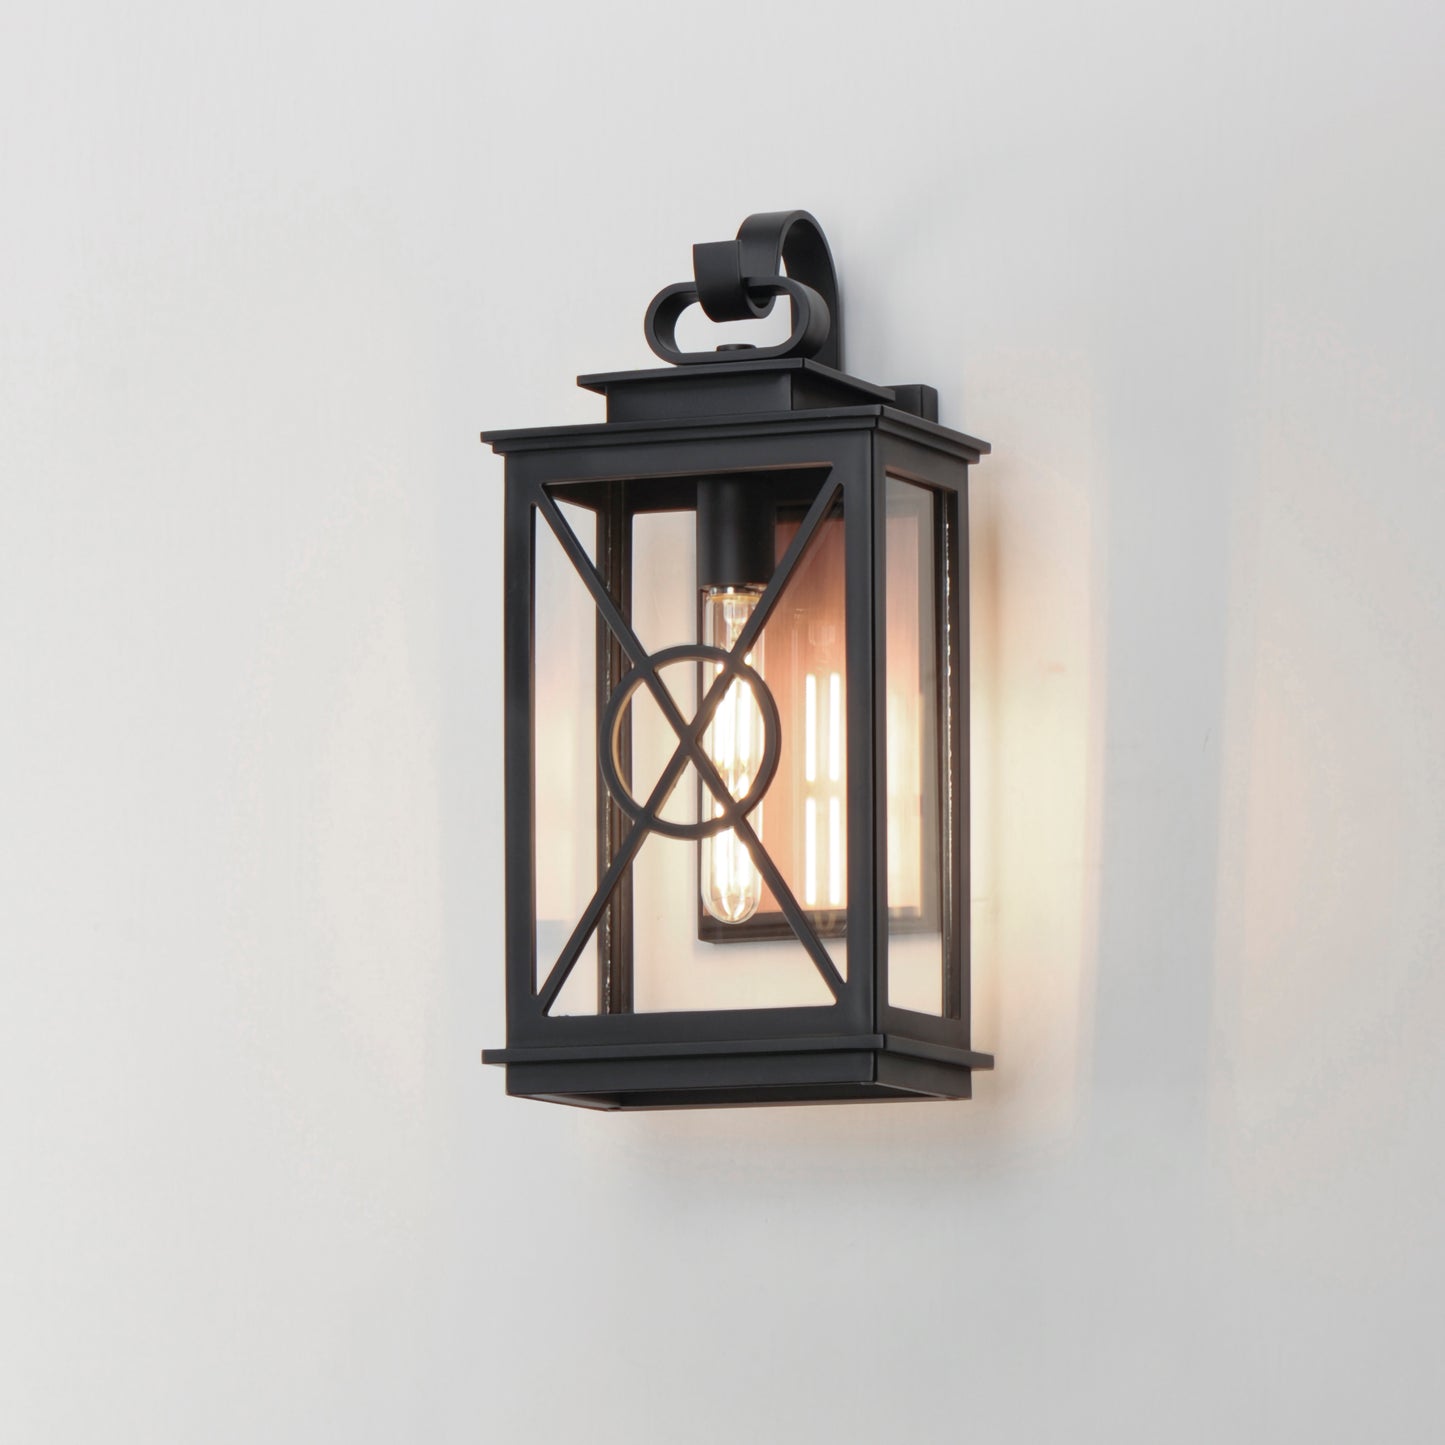 40804CLACPBK - Yorktown VX 18" Outdoor Wall Sconce - Black/Aged Copper